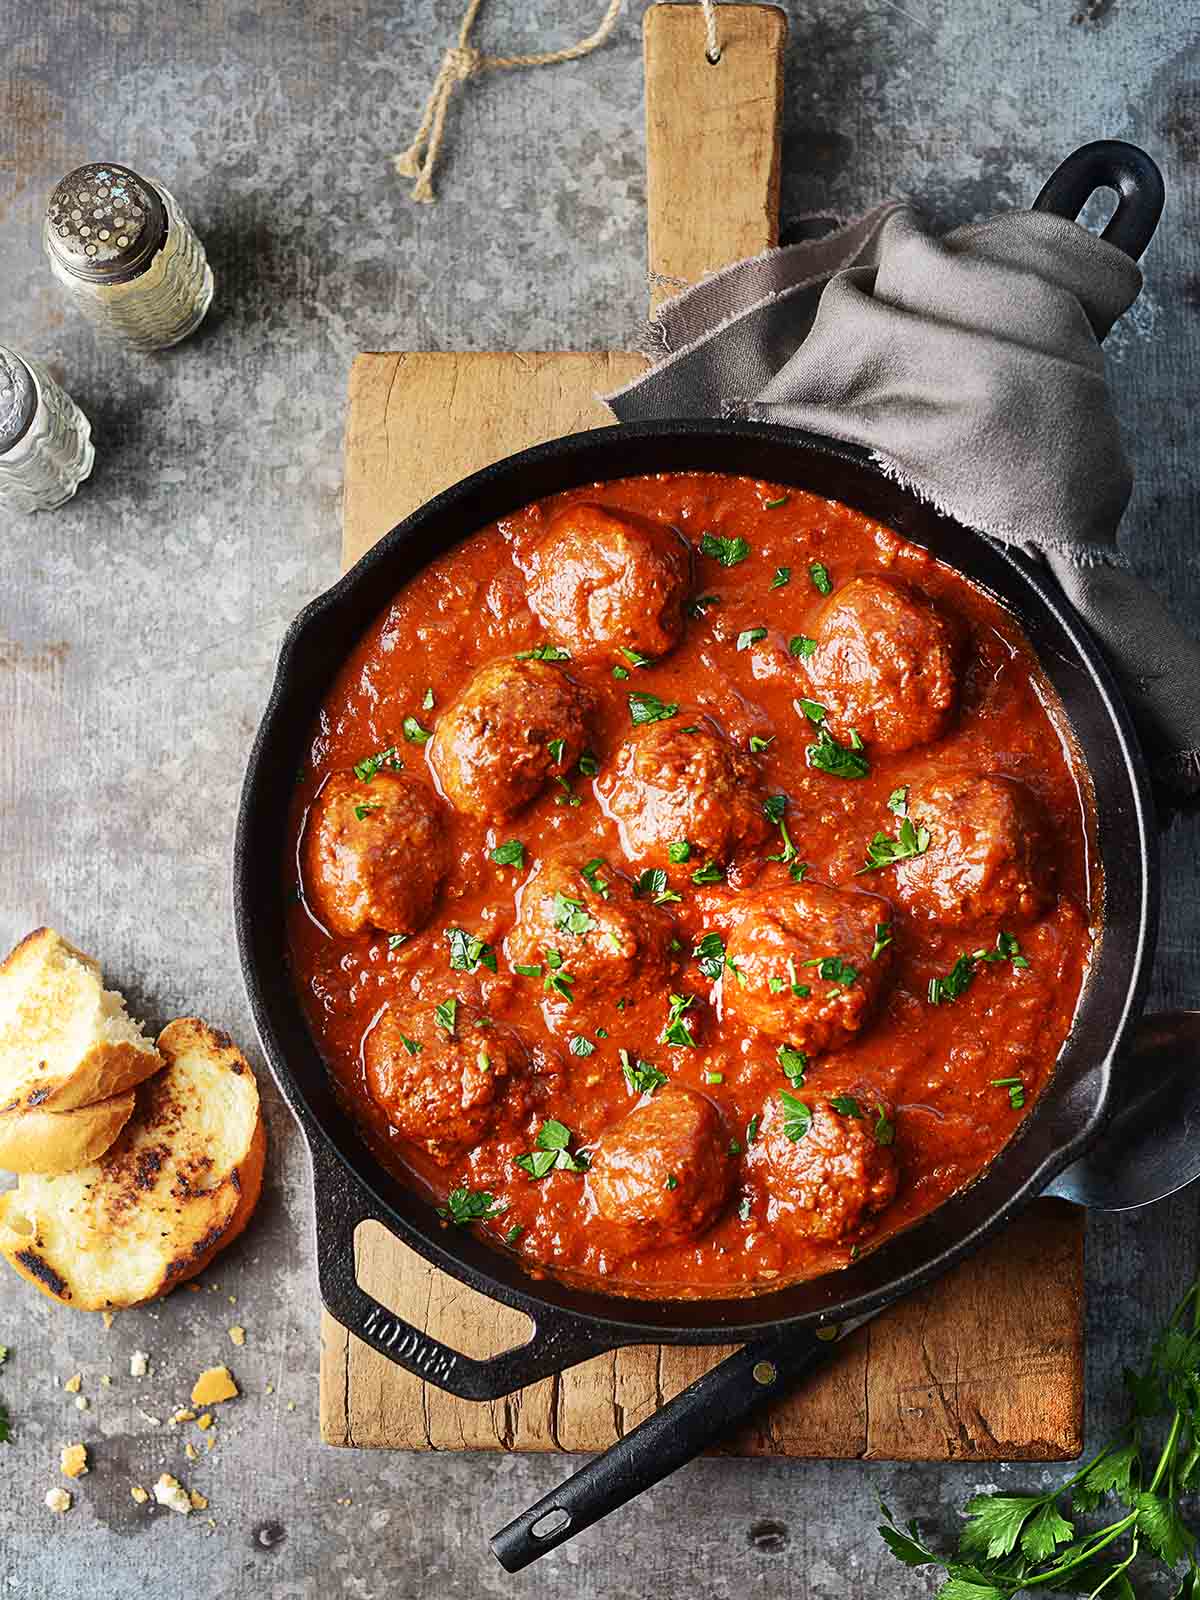 Healthy Meatballs: Flavorful and Tender!